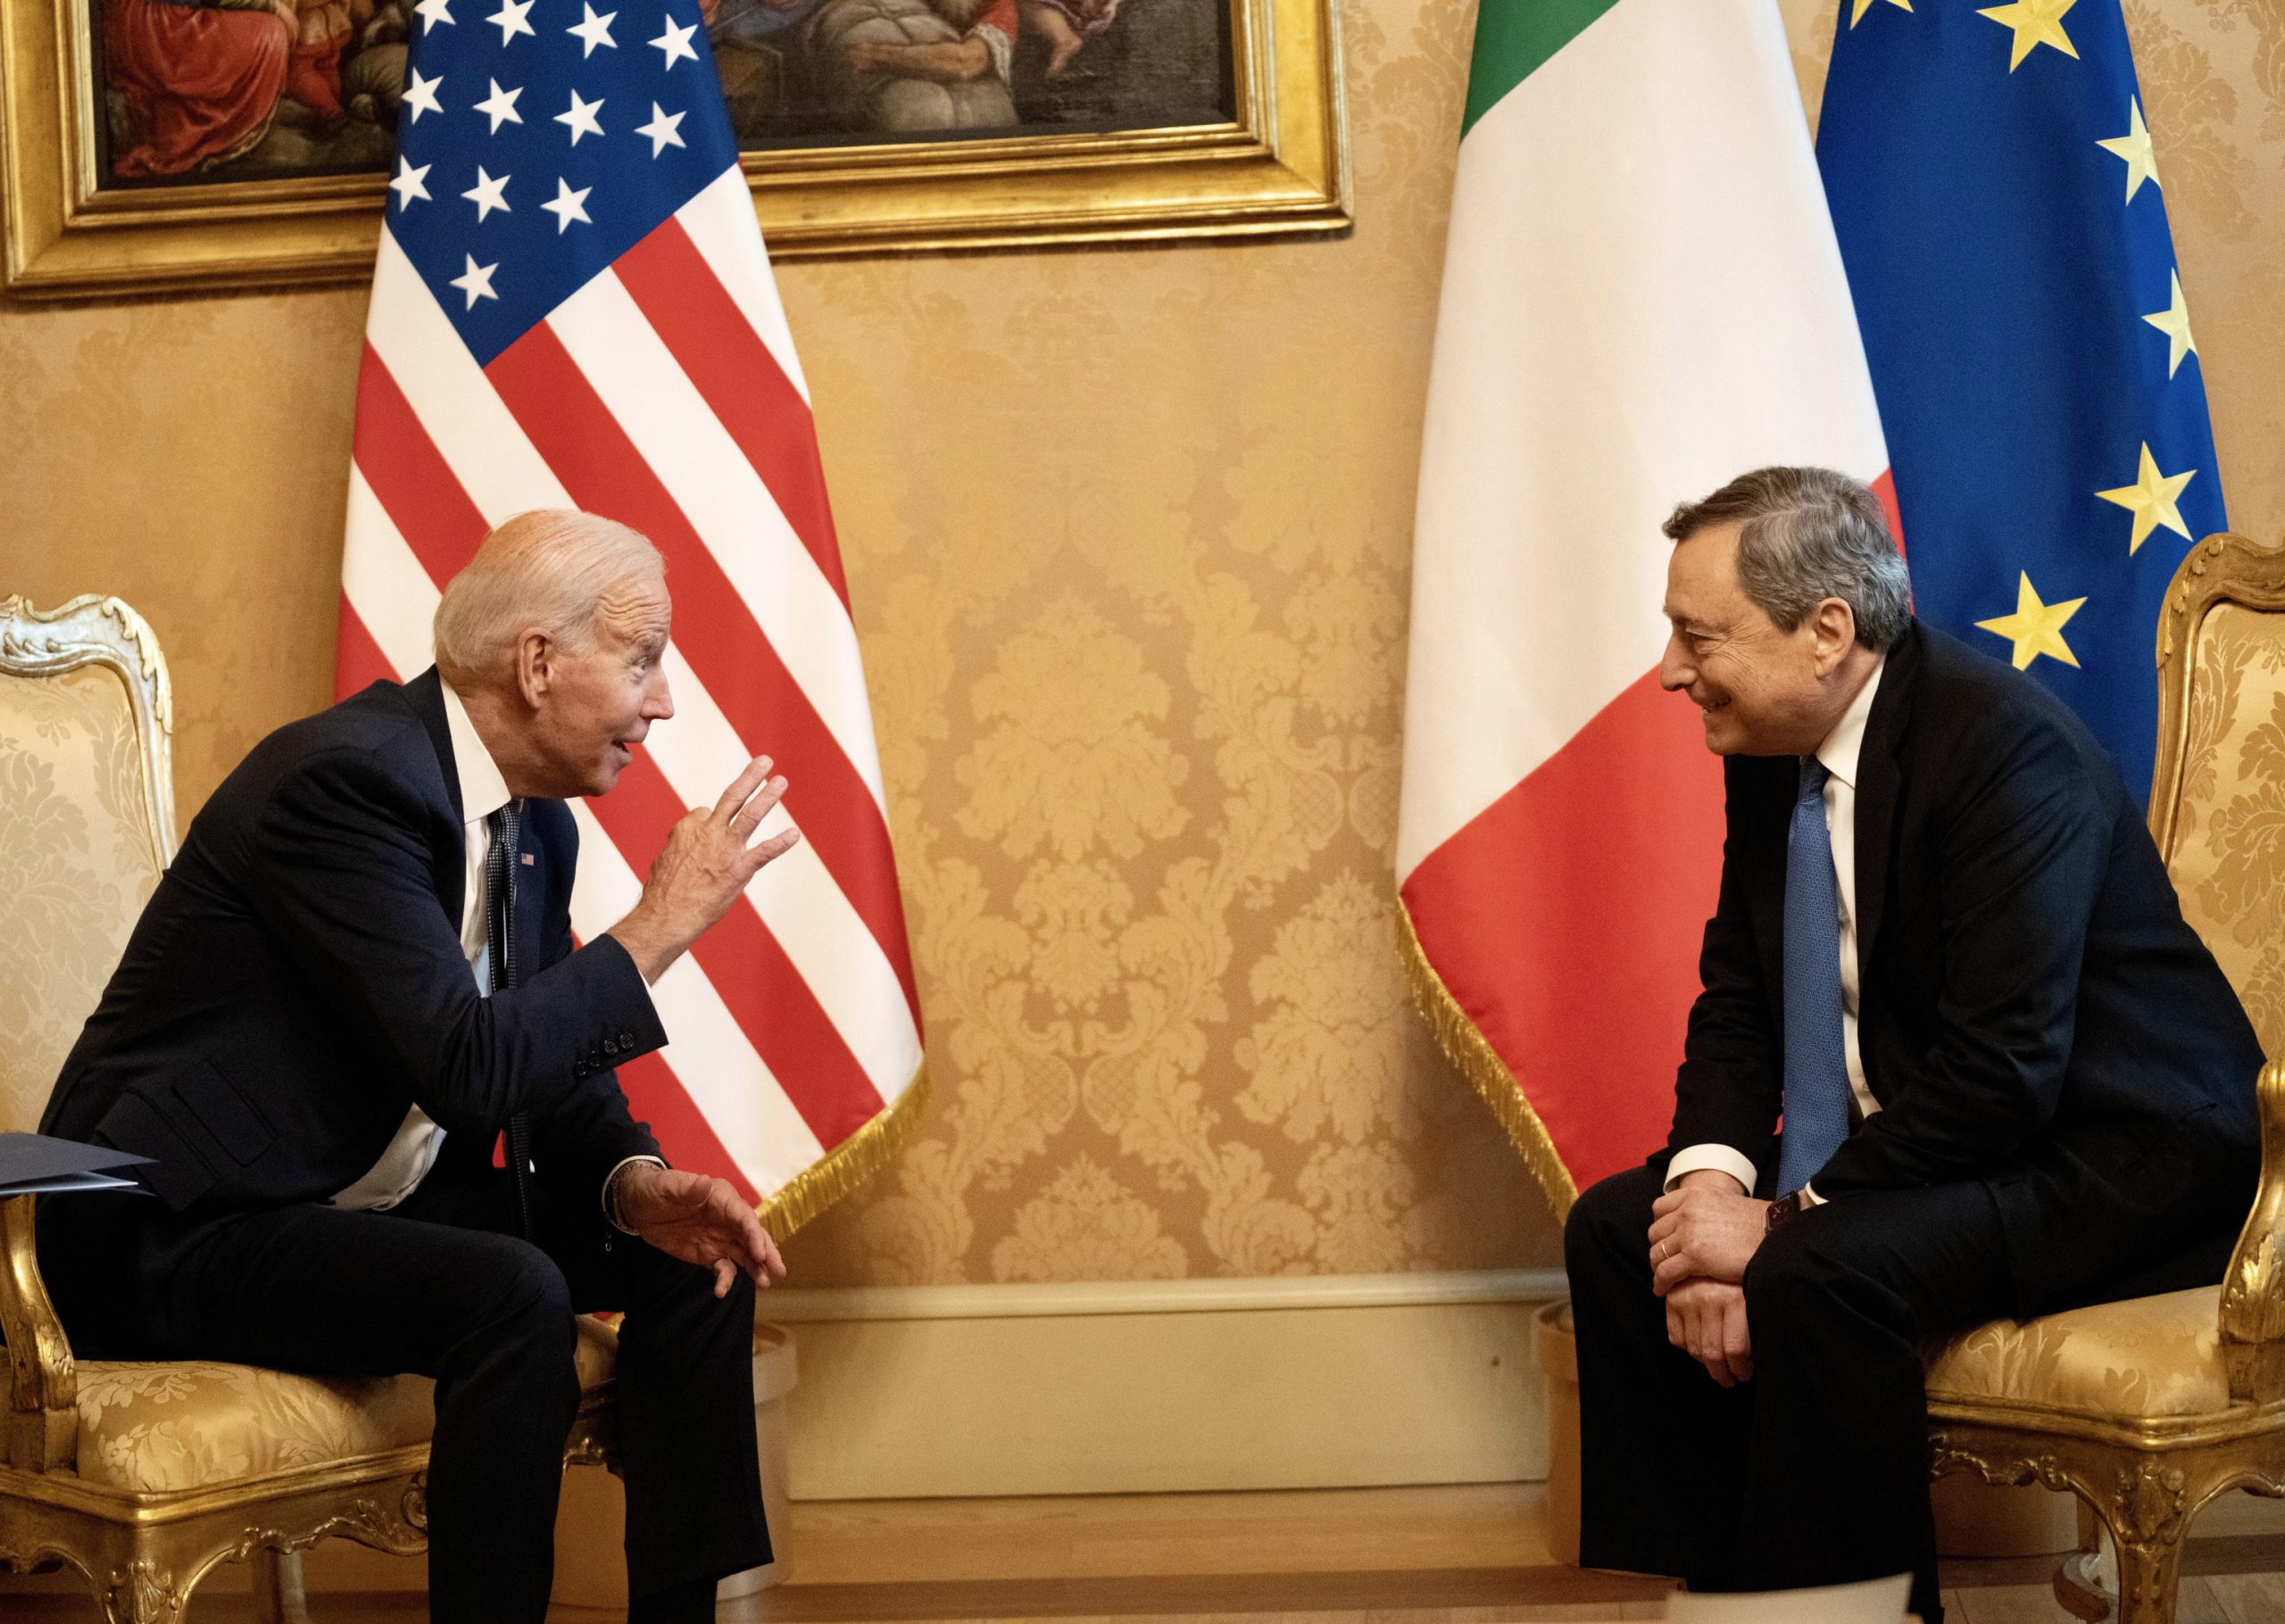 epa09552789 A handout photo made available by Chigi Palace Press Office shows Italy's Prime Minister, Mario Draghi and US President Joe Biden during their meeting at the Chigi palace in Rome, Italy, 29 October 2021, ahead of an upcoming G20 summit of world leaders to discuss climate change, covid-19 and the post-pandemic global recovery.  EPA/FILIPPO ATTILI / CHIGI PALACE PRESS OFFICE / HANDOUT  HANDOUT EDITORIAL USE ONLY/NO SALES